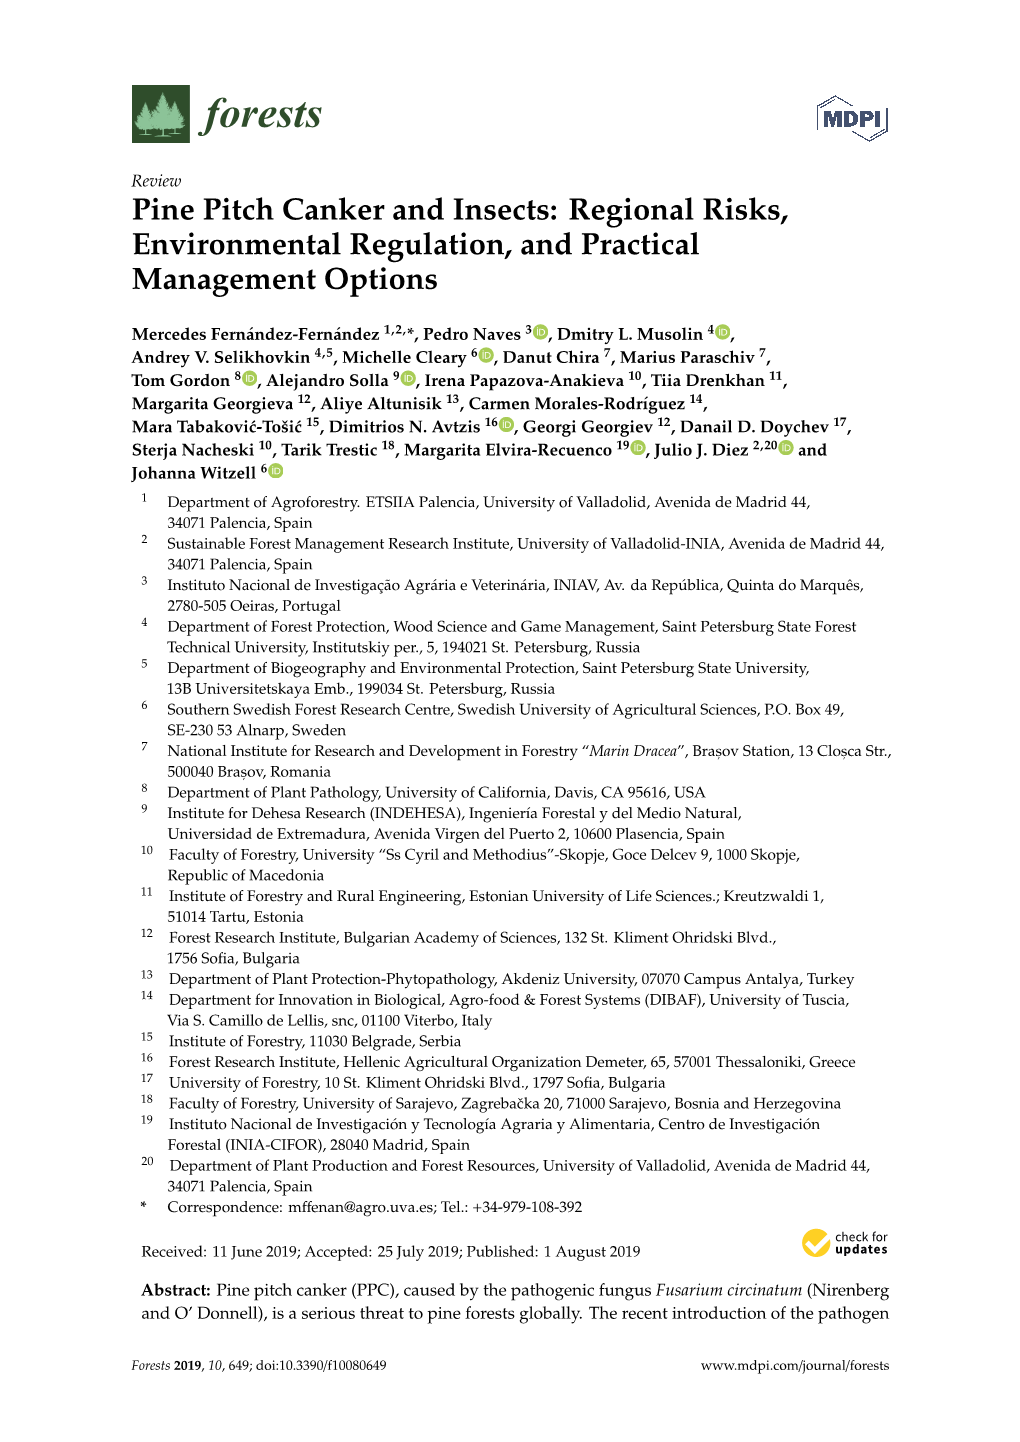 Pine Pitch Canker and Insects: Regional Risks, Environmental Regulation, and Practical Management Options